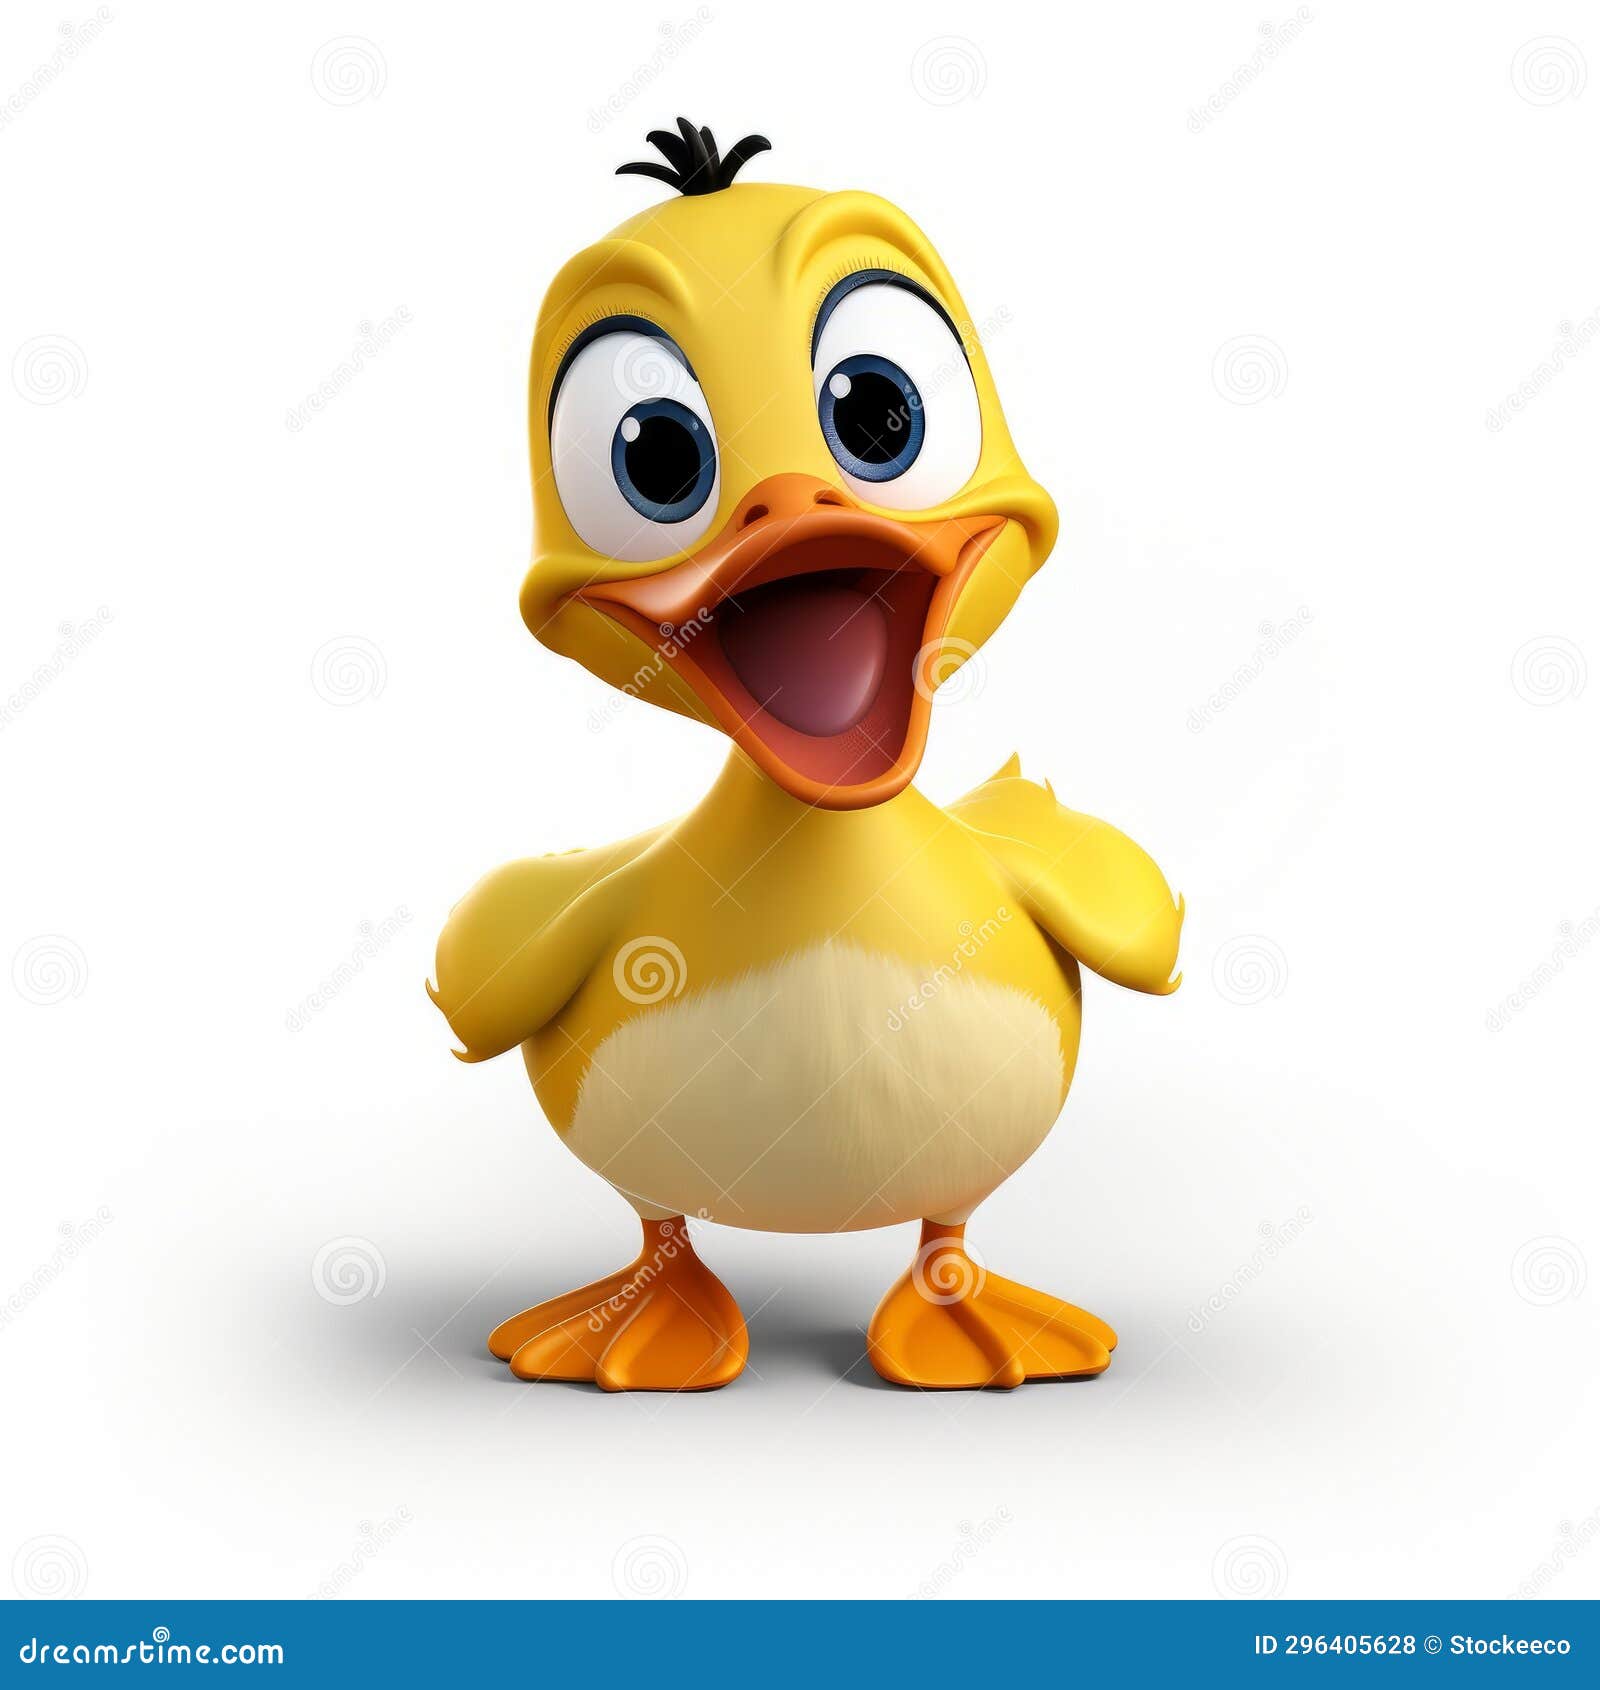 3d pixar duck: yellow character in flickr, icepunk, disney animation style